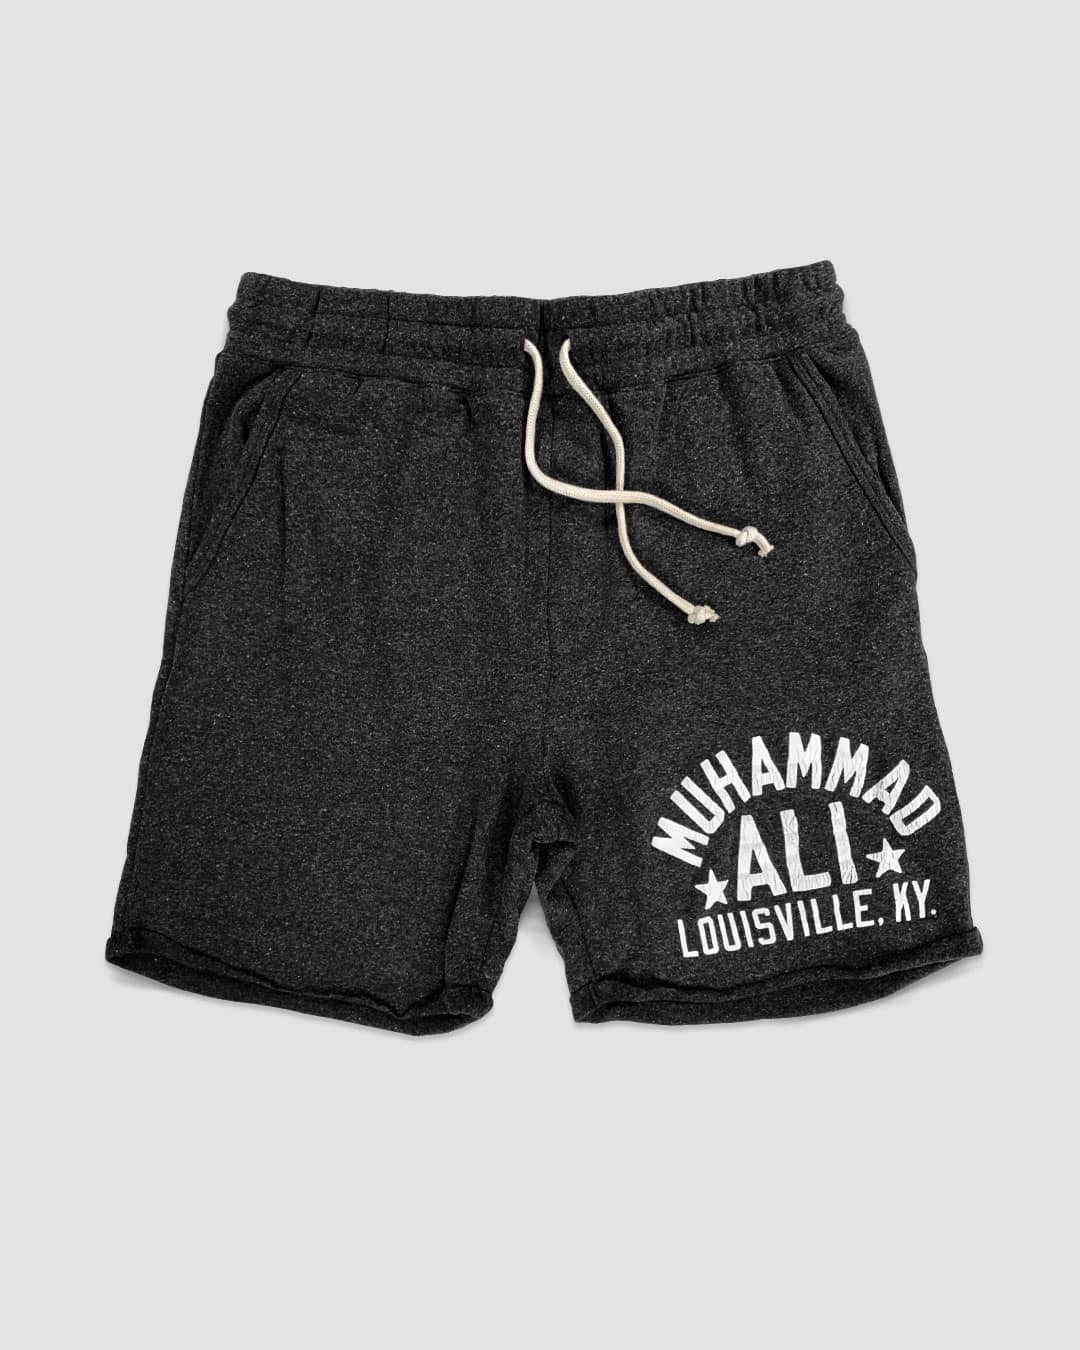 Ali Louisville Shorts - Roots of Inc dba Roots of Fight